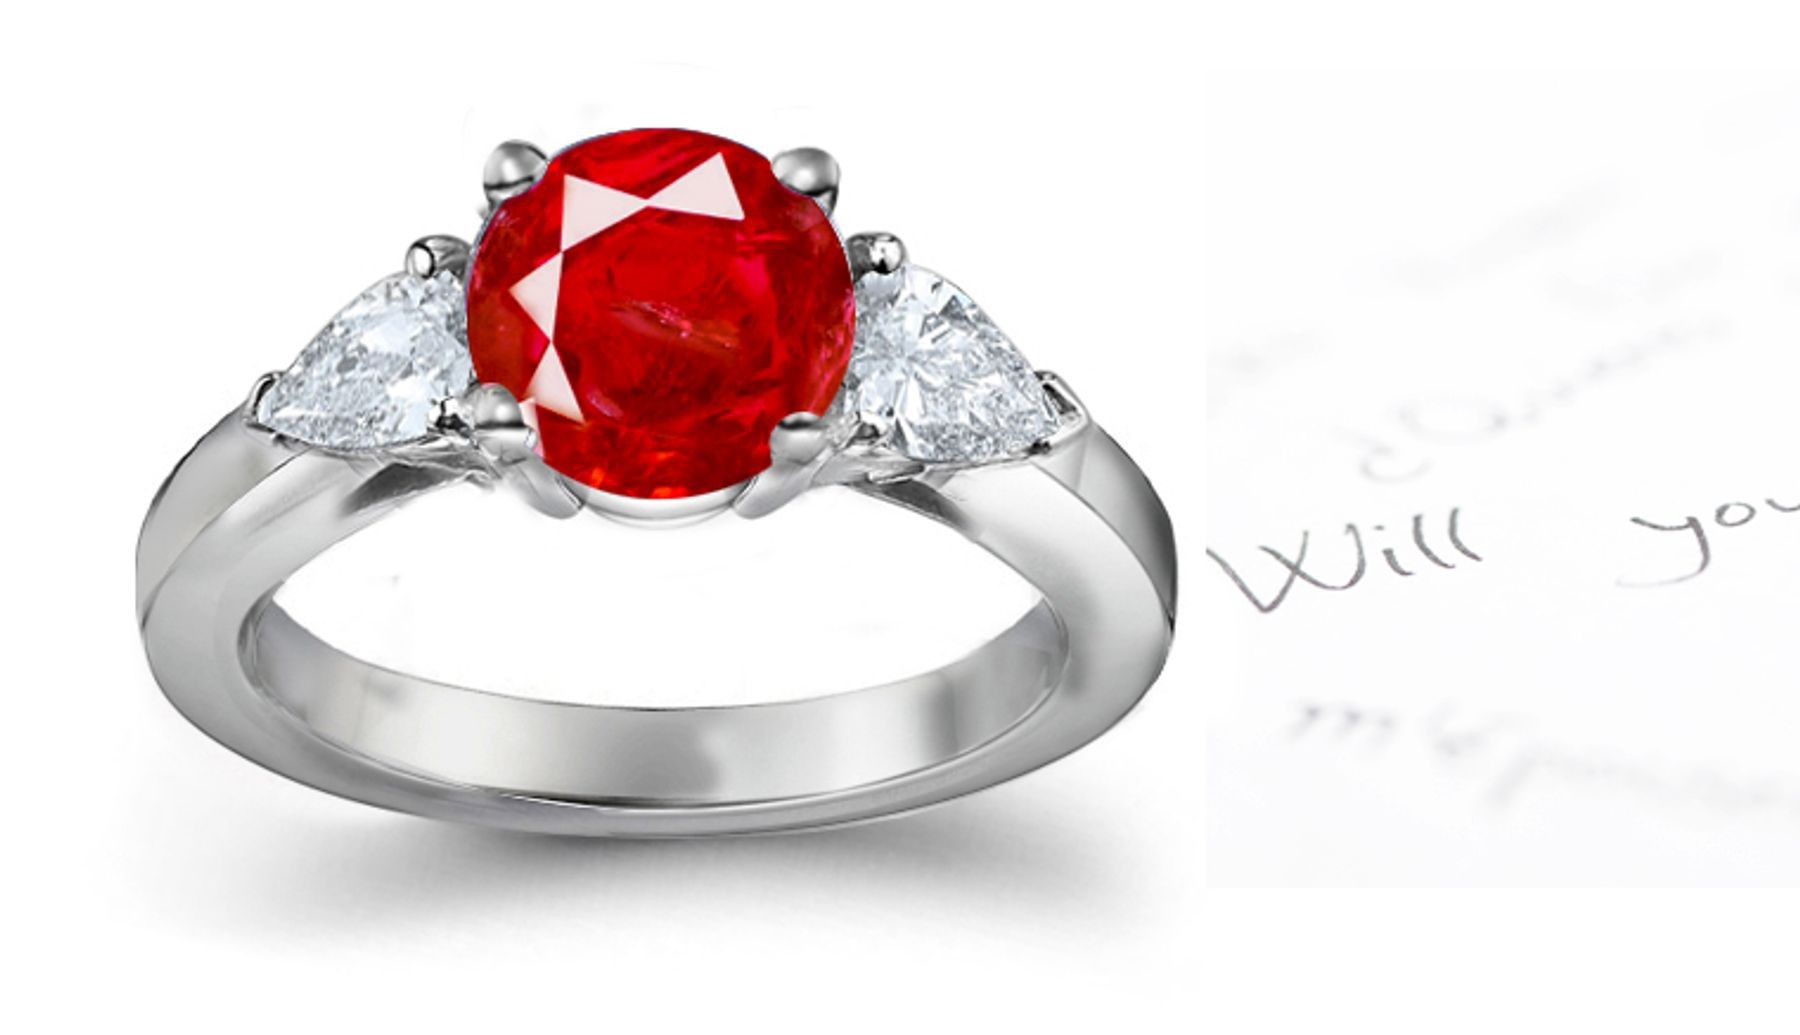 Available In Stock: Vivid Cherry Red 3 Stone Round Ruby & Pear Shape Diamond 3 Stone Anniversary Rings Silver Gold Ring. Comes With Sapphire Also Price $2375 - $$69,750